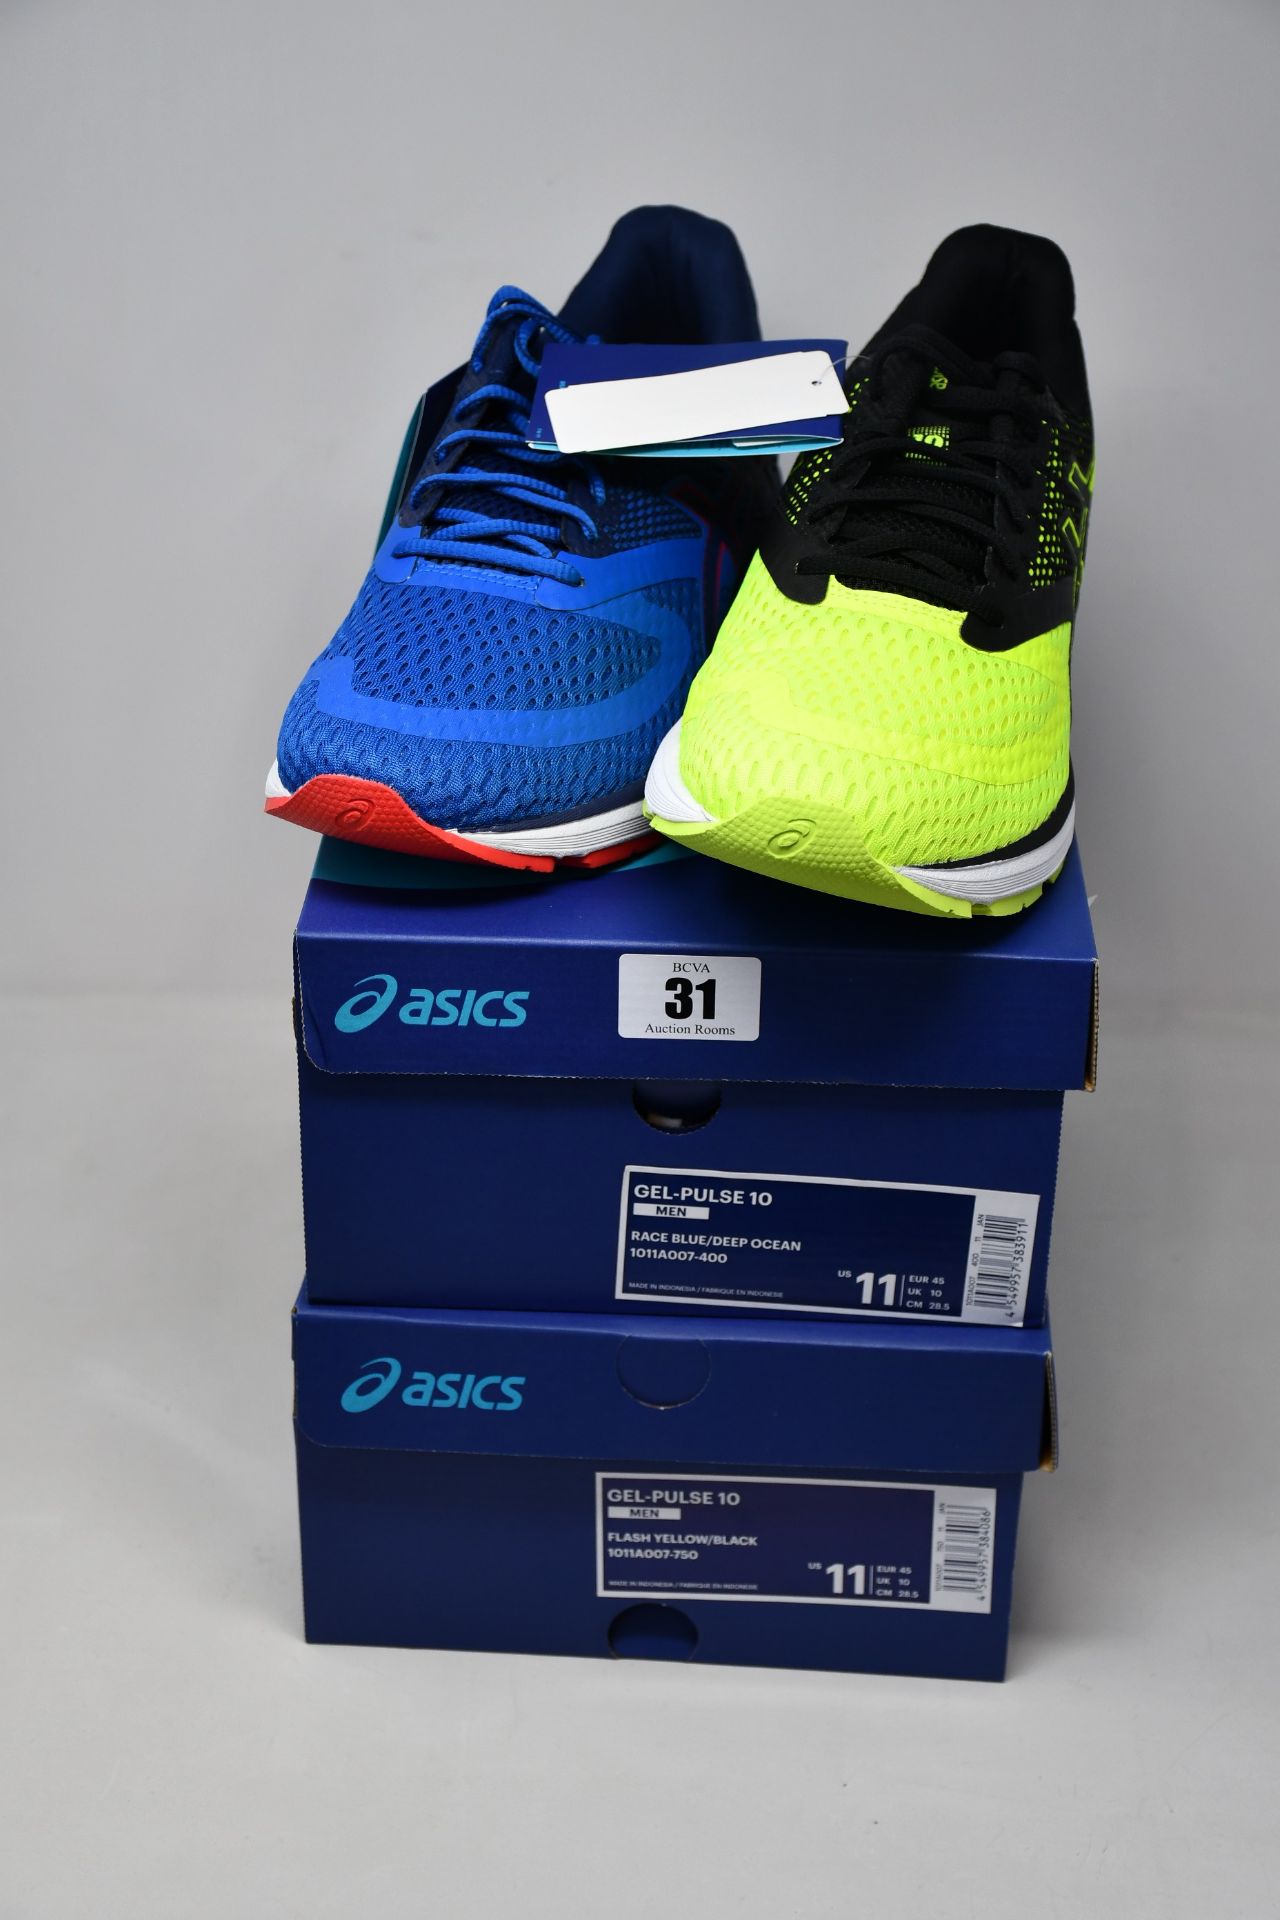 Two pairs of as new Asics Gel-Pulse 10 trainers (UK 10).